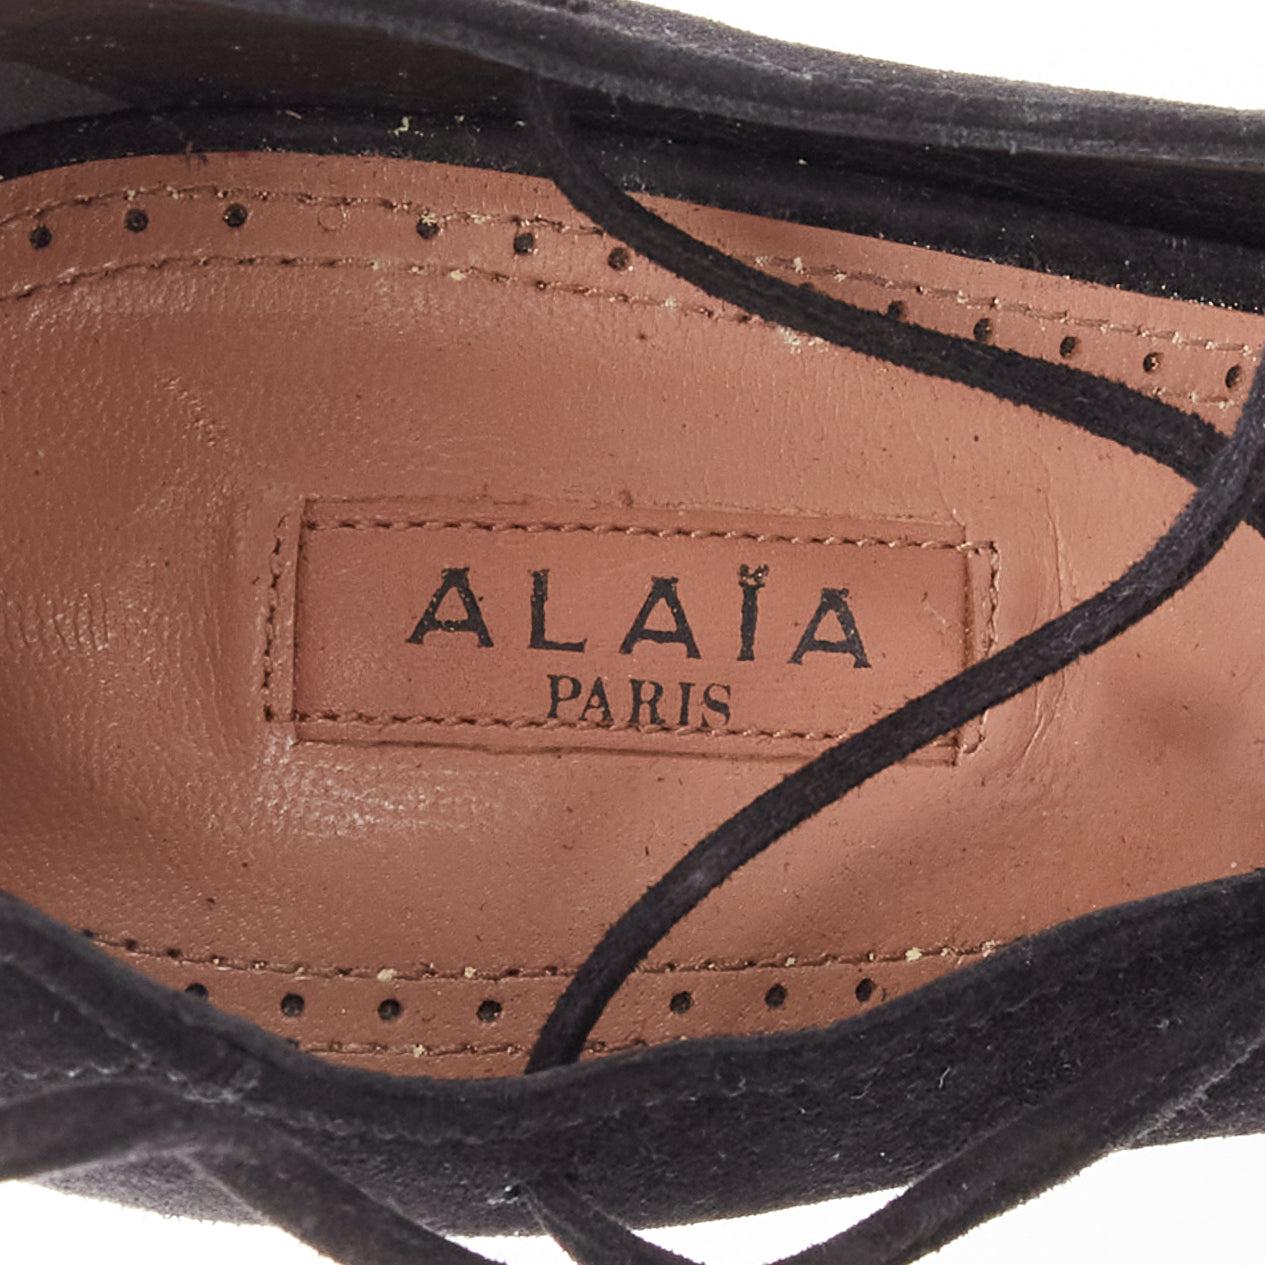 ALAIA black suede leather lace up back zip strappy sandal heels EU38.5 For Sale 5